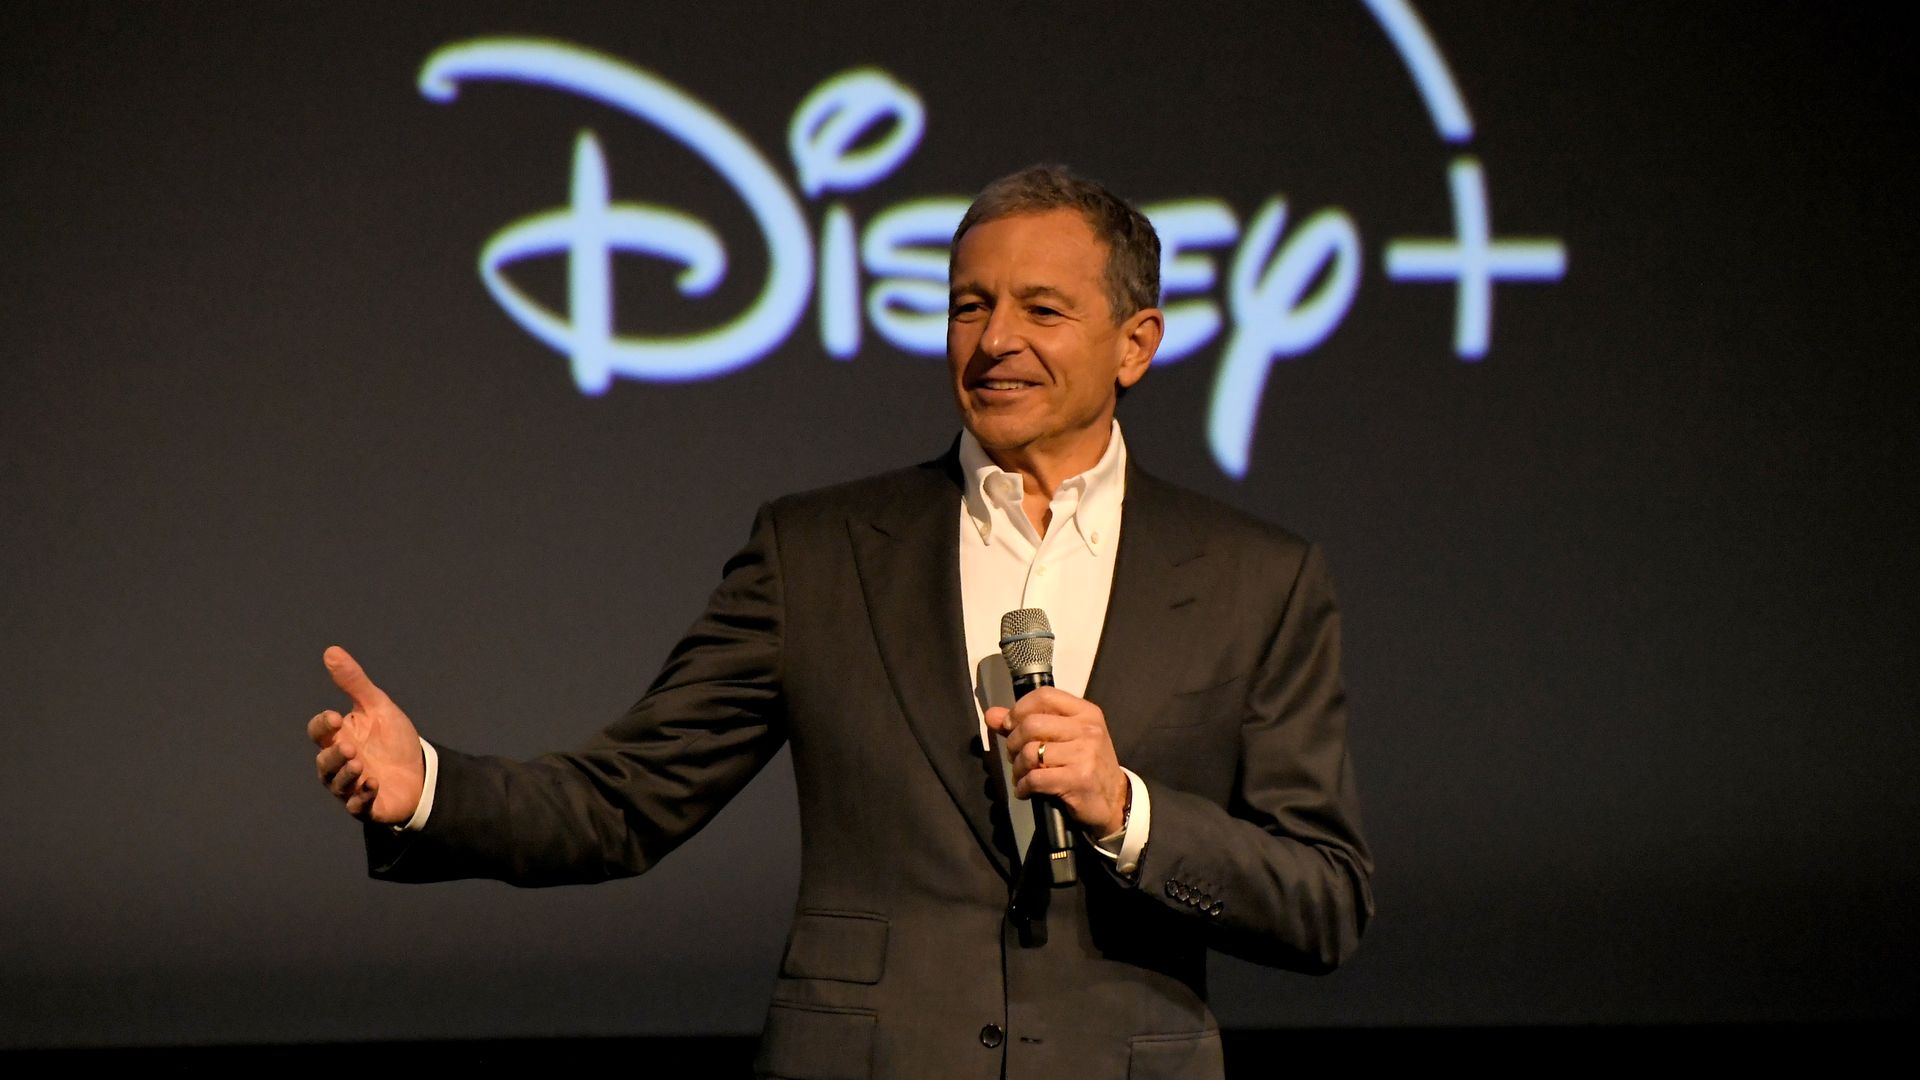 Bob Iger attends the Exclusive 100-Minute Sneak Peek of Peter Jackson's The Beatles: Get Back at El Capitan Theatre on November 18, 2021 in Hollywood, California.